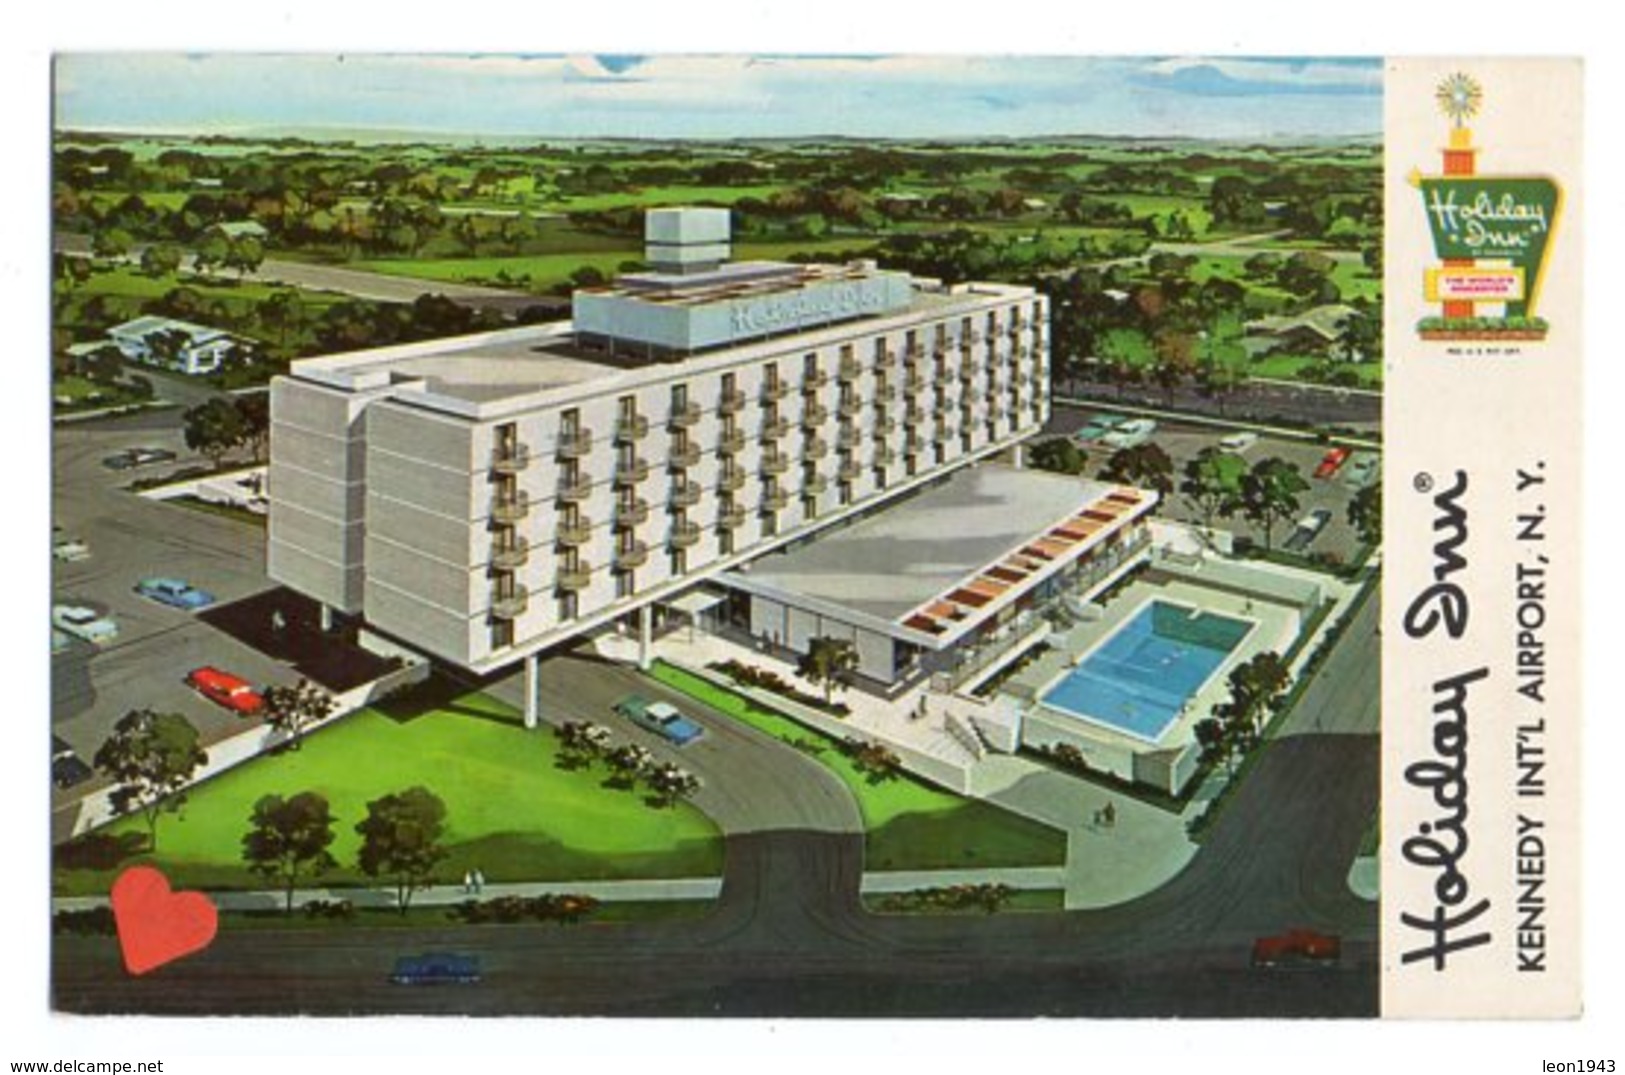 15646-LE-ETATS UNIS-Holiday Inn--KENNEDY AIRPORT-NEW YORK - Airports